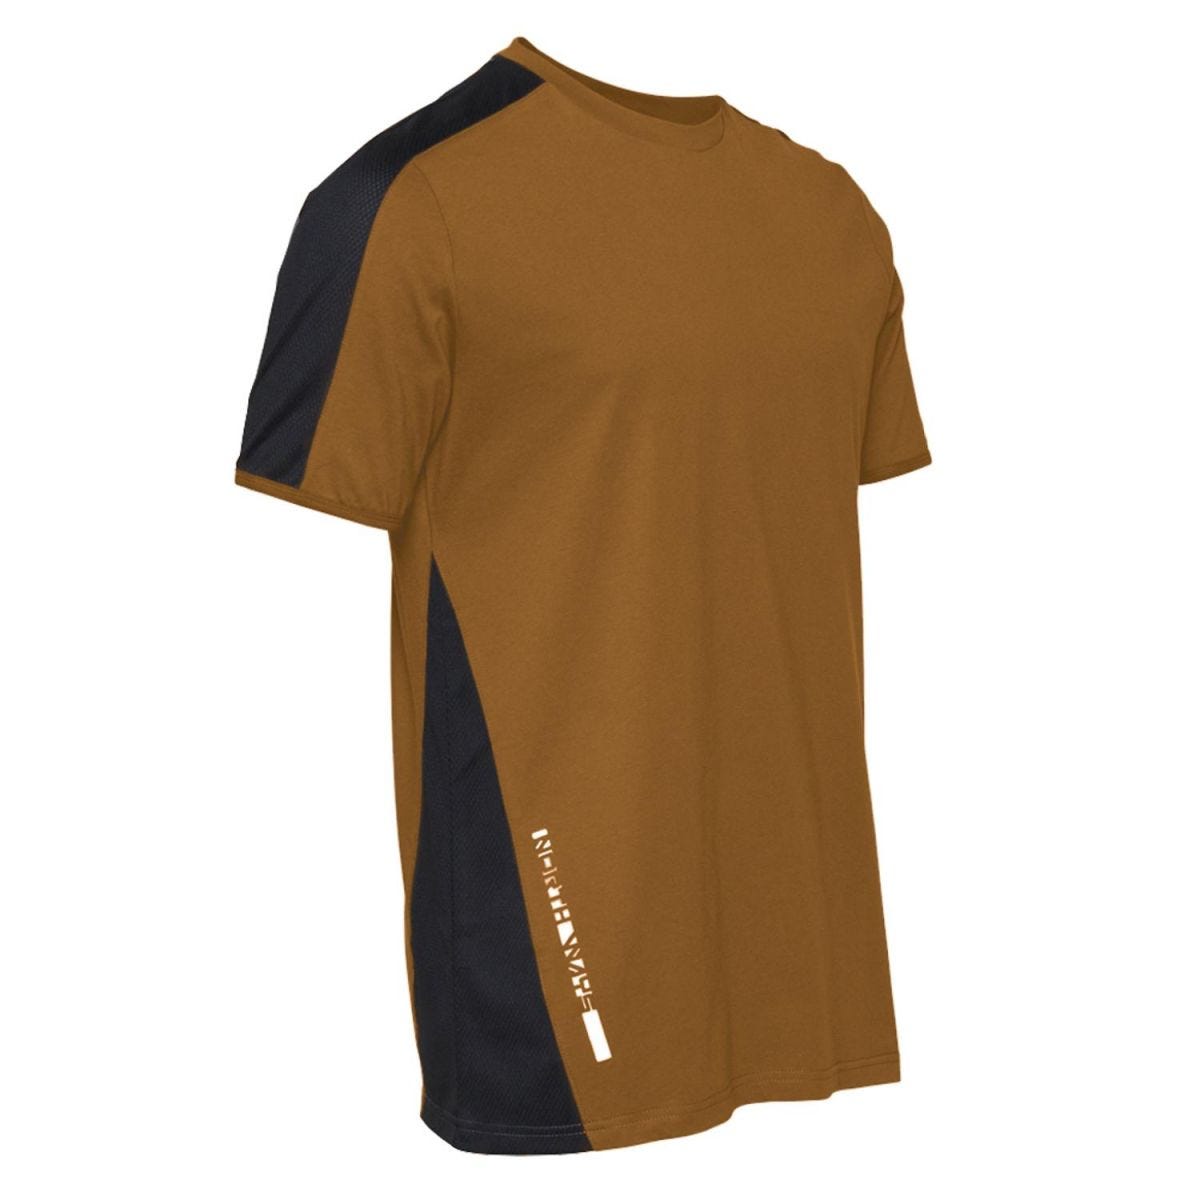 Tee-shirt à manches courtes pour homme Andy camel - North Ways - Taille 4XL 2